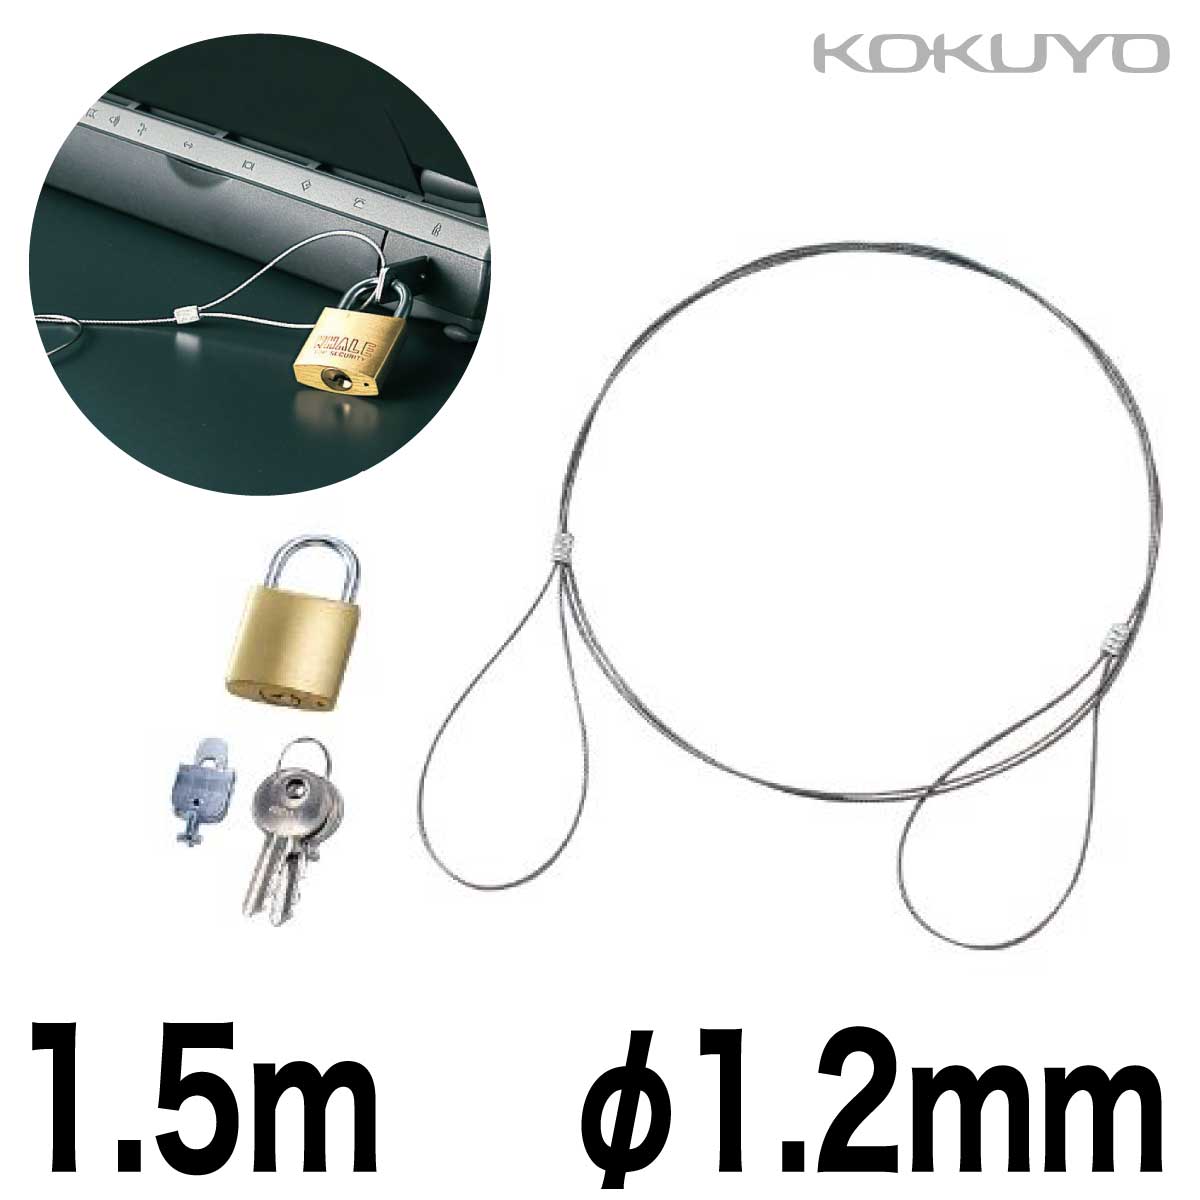 [kokyo] security wire personal computer lock kit EAS-L3N security slot correspondence south capital pills type wire diameter 1.2mm×1.5m personal computer anti-theft 